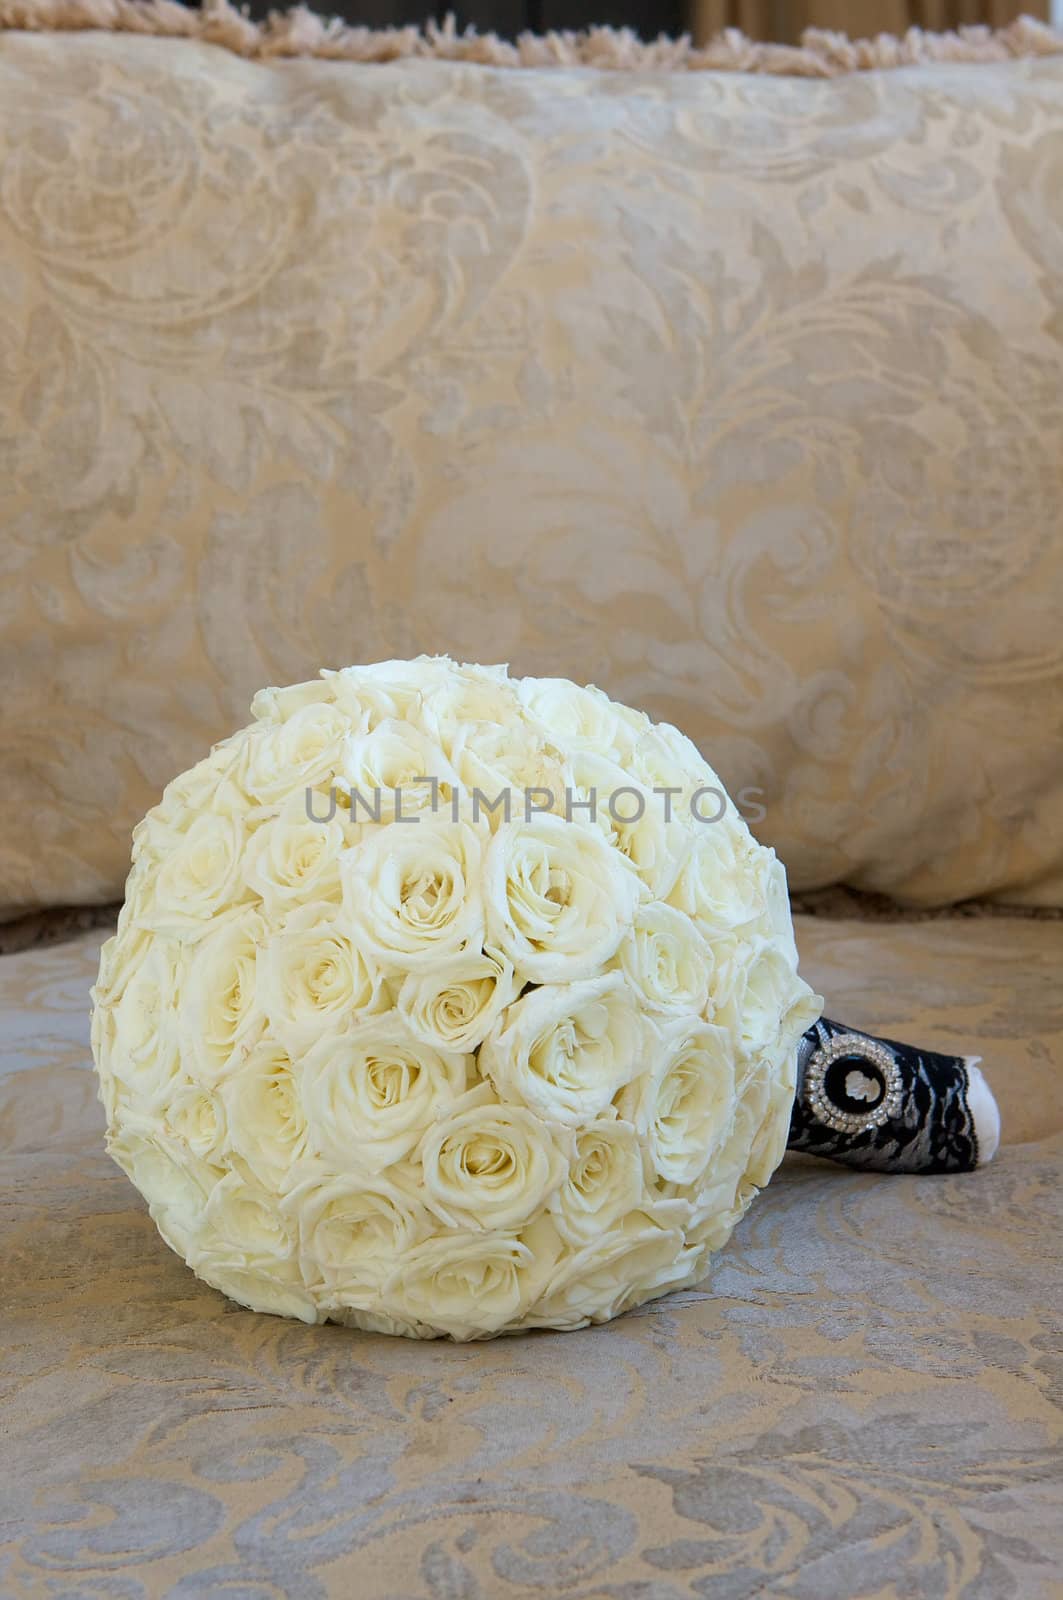 A bridal bouquet of flowers made with cream colored roses